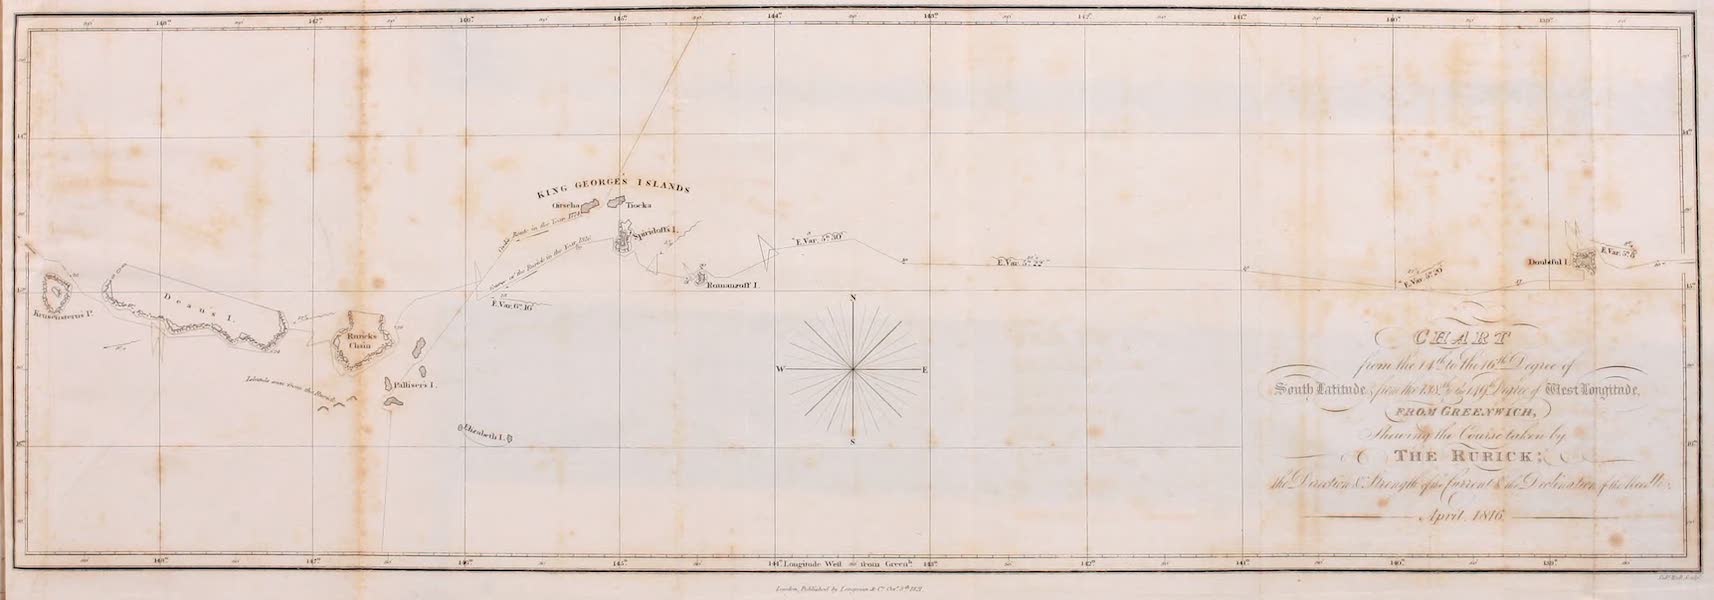 A Voyage of Discovery, into the South Sea and Beering's Straits Vol. 1 - Chart of Course Taken by the Rurick (1821)